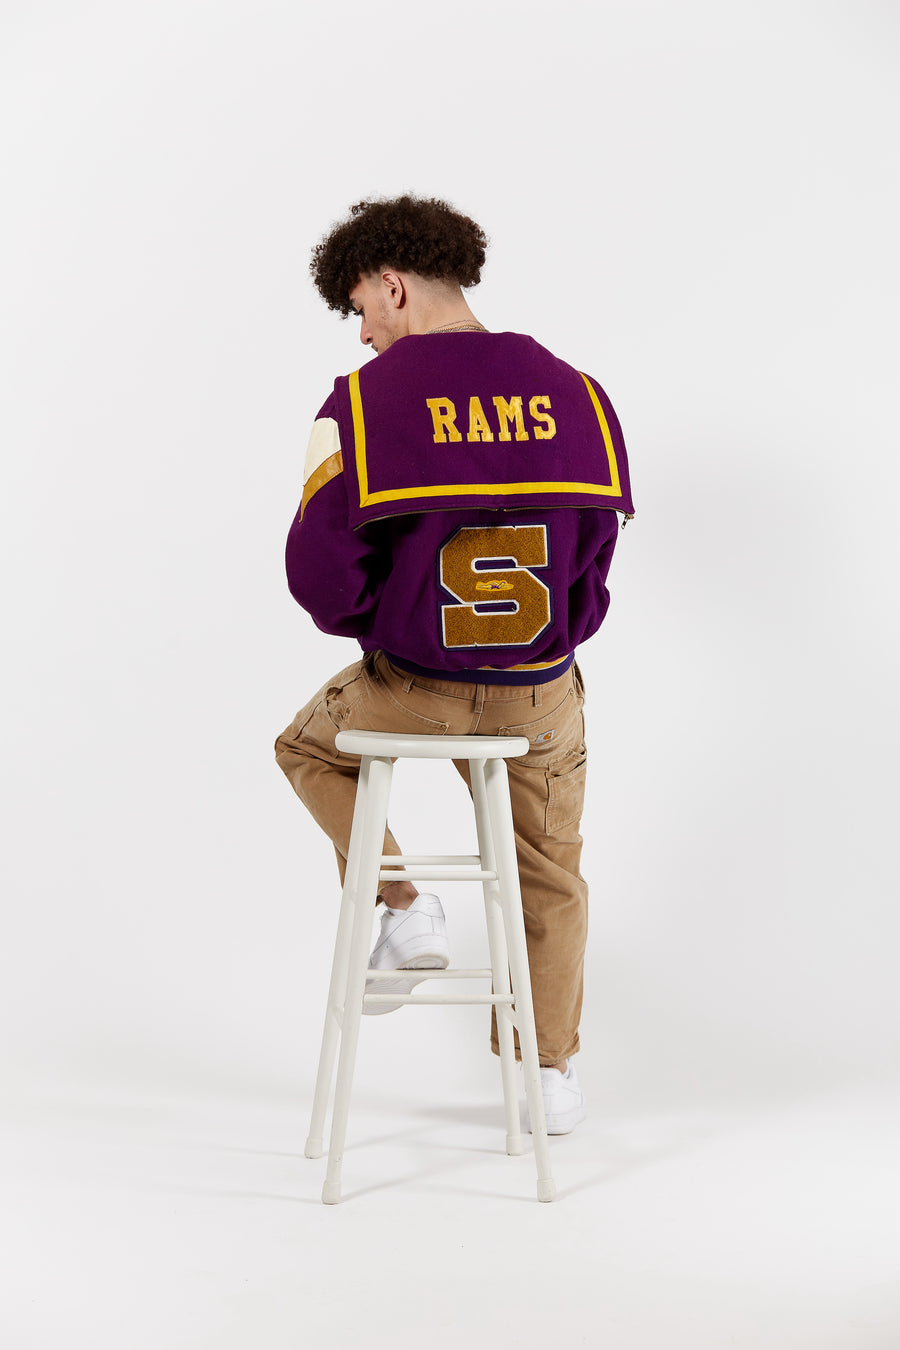 Rams Swim Club Letterman Jacket in a vintage style from thrift store Twise Studio